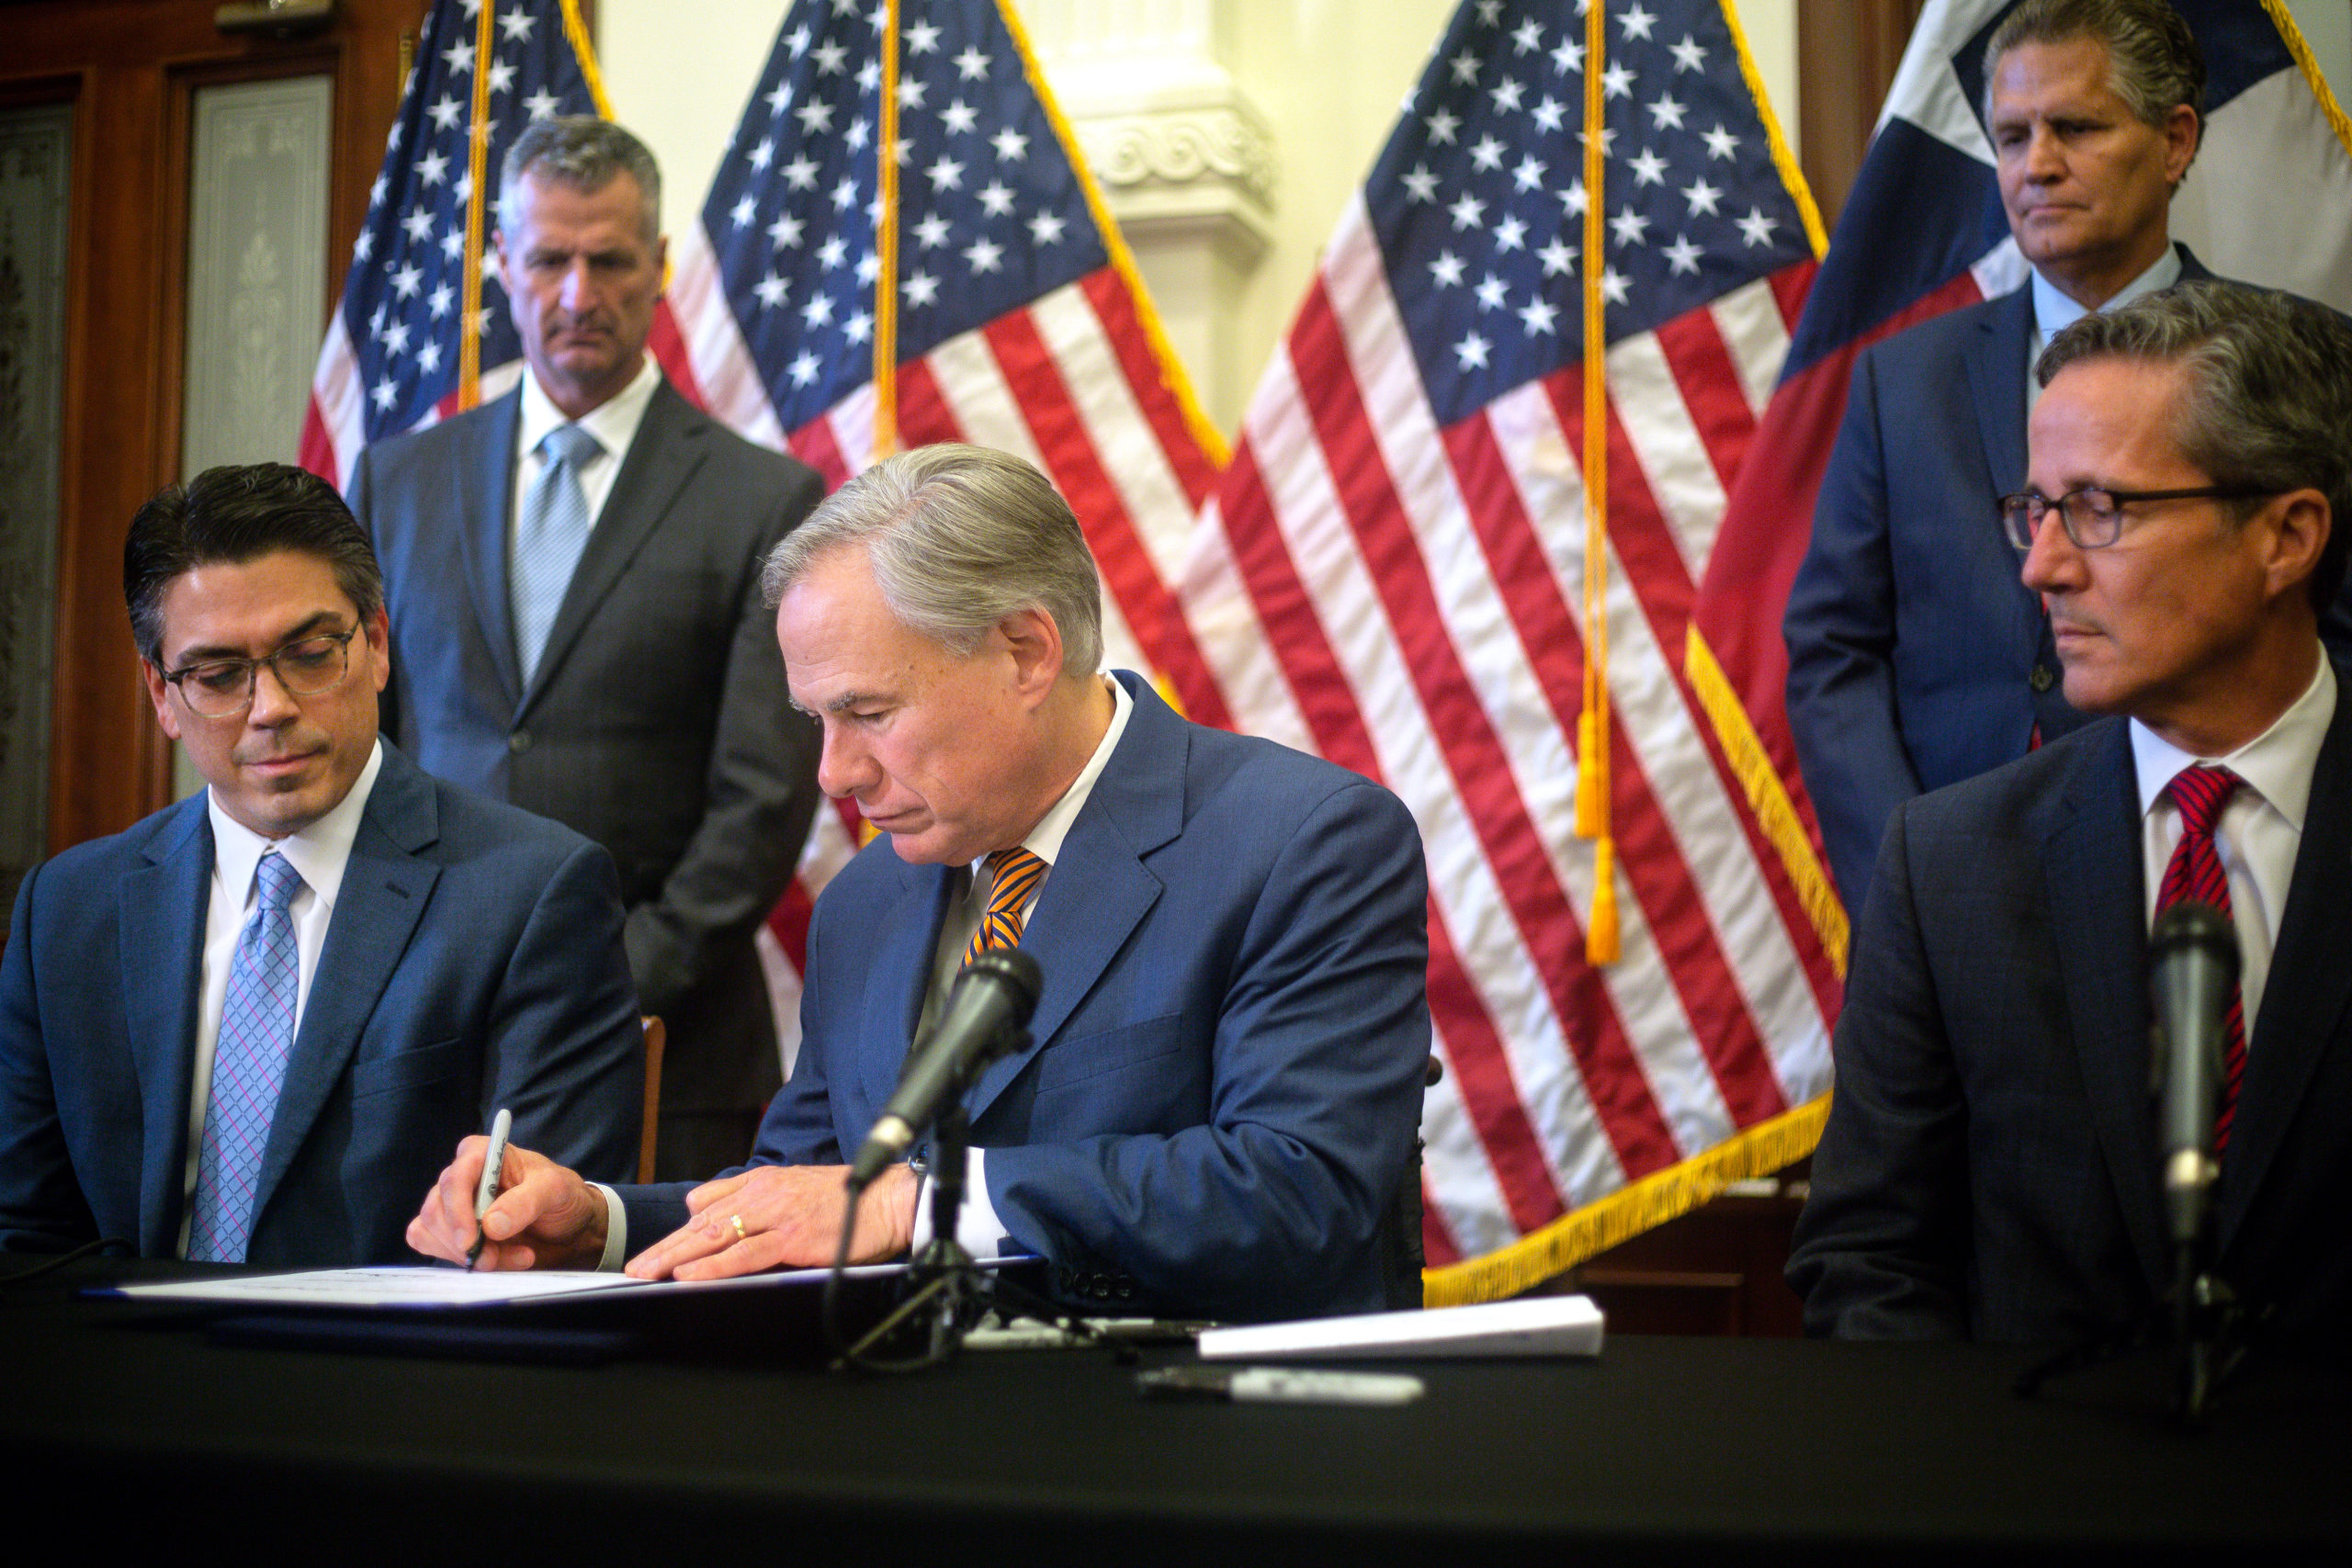 AUSTIN, TX - JUNE 08: State Rep. Chris Paddie (L) and State Senator Kelly Hancock (R) watch as Texas Governor Greg Abbott signs Senate Bills 2 and 3 during a press conference at the Capitol on June 8, 2021 in Austin, Texas. Governor Abbott signed the bills into law to reform the Electric Reliability Council of Texas and weatherize and improve the reliability of the state's power grid. The bill signing comes months after a disastrous February winter storm that caused widespread power outages and left dozens of Texans dead. (Photo by Montinique Monroe/Getty Images)